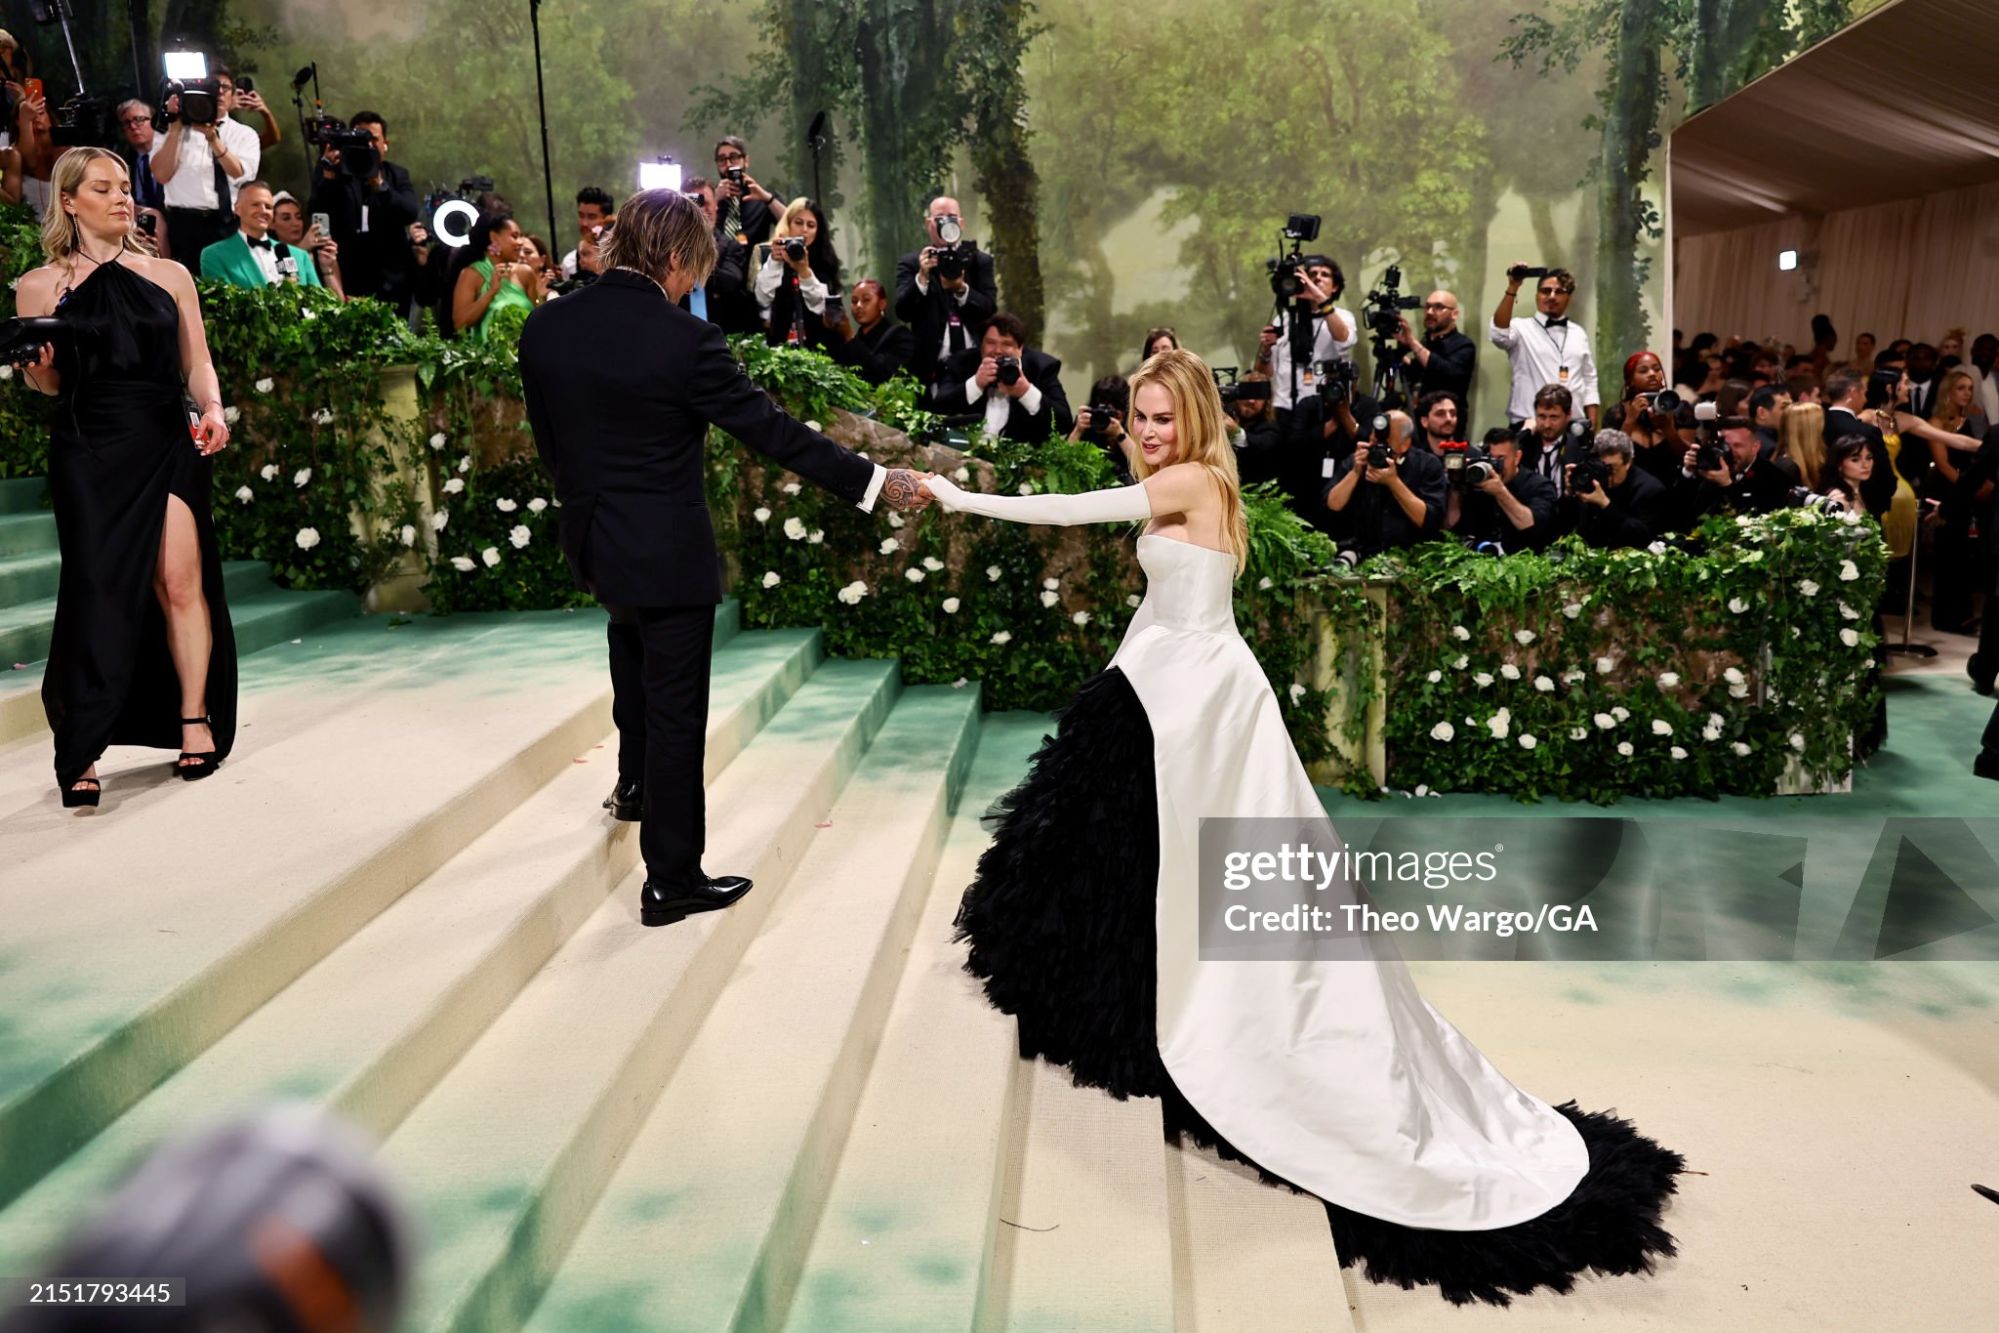 gettyimages-2151793445-2048x2048.jpg